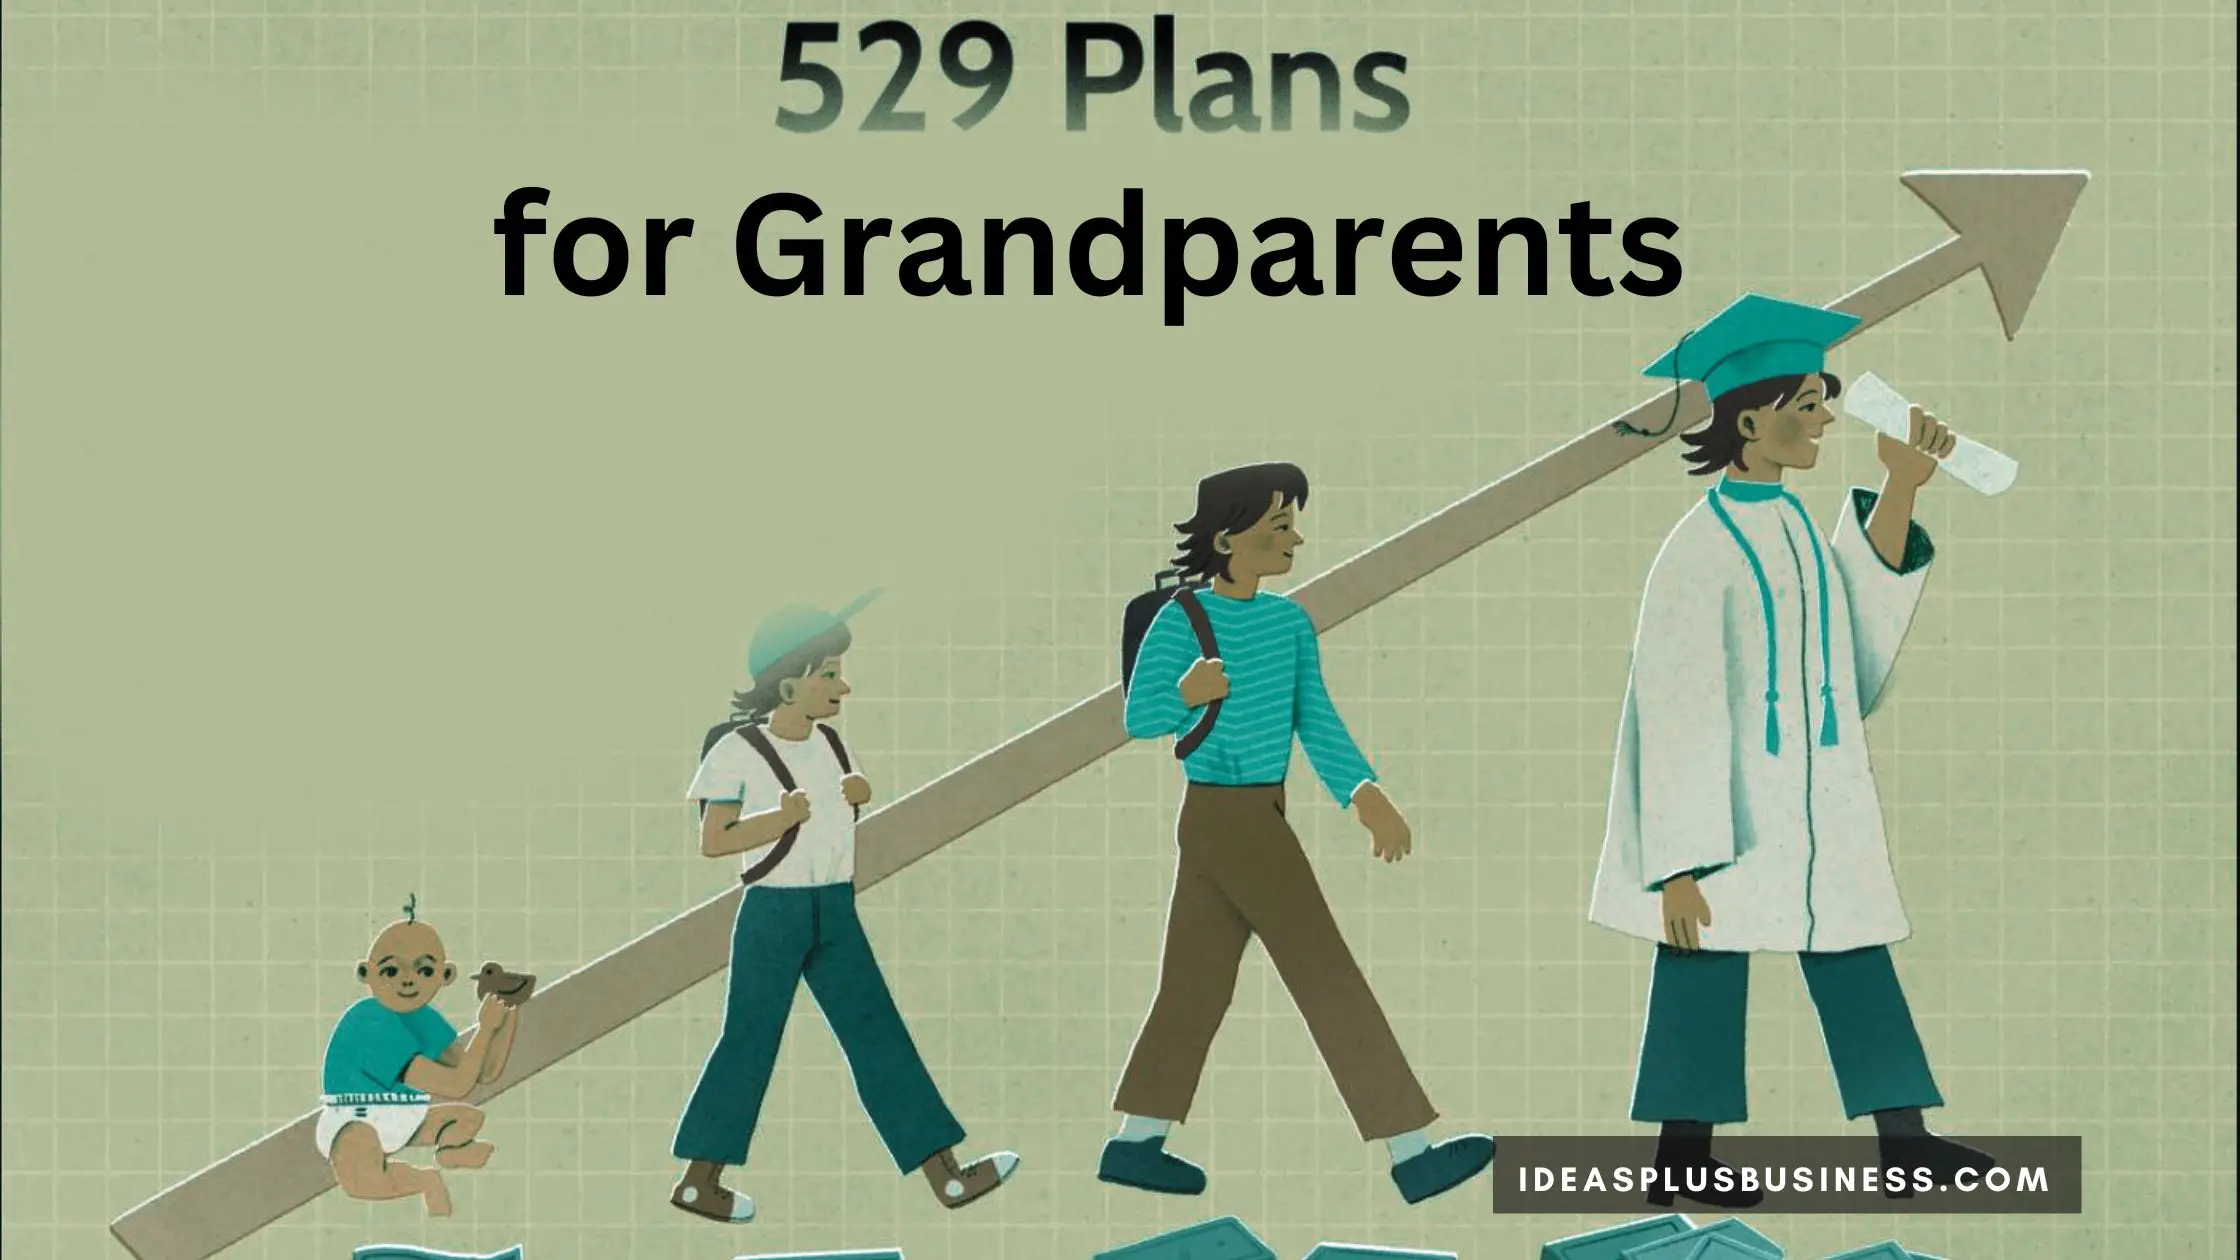 Pros and Cons of 529 Plans for Grandparents